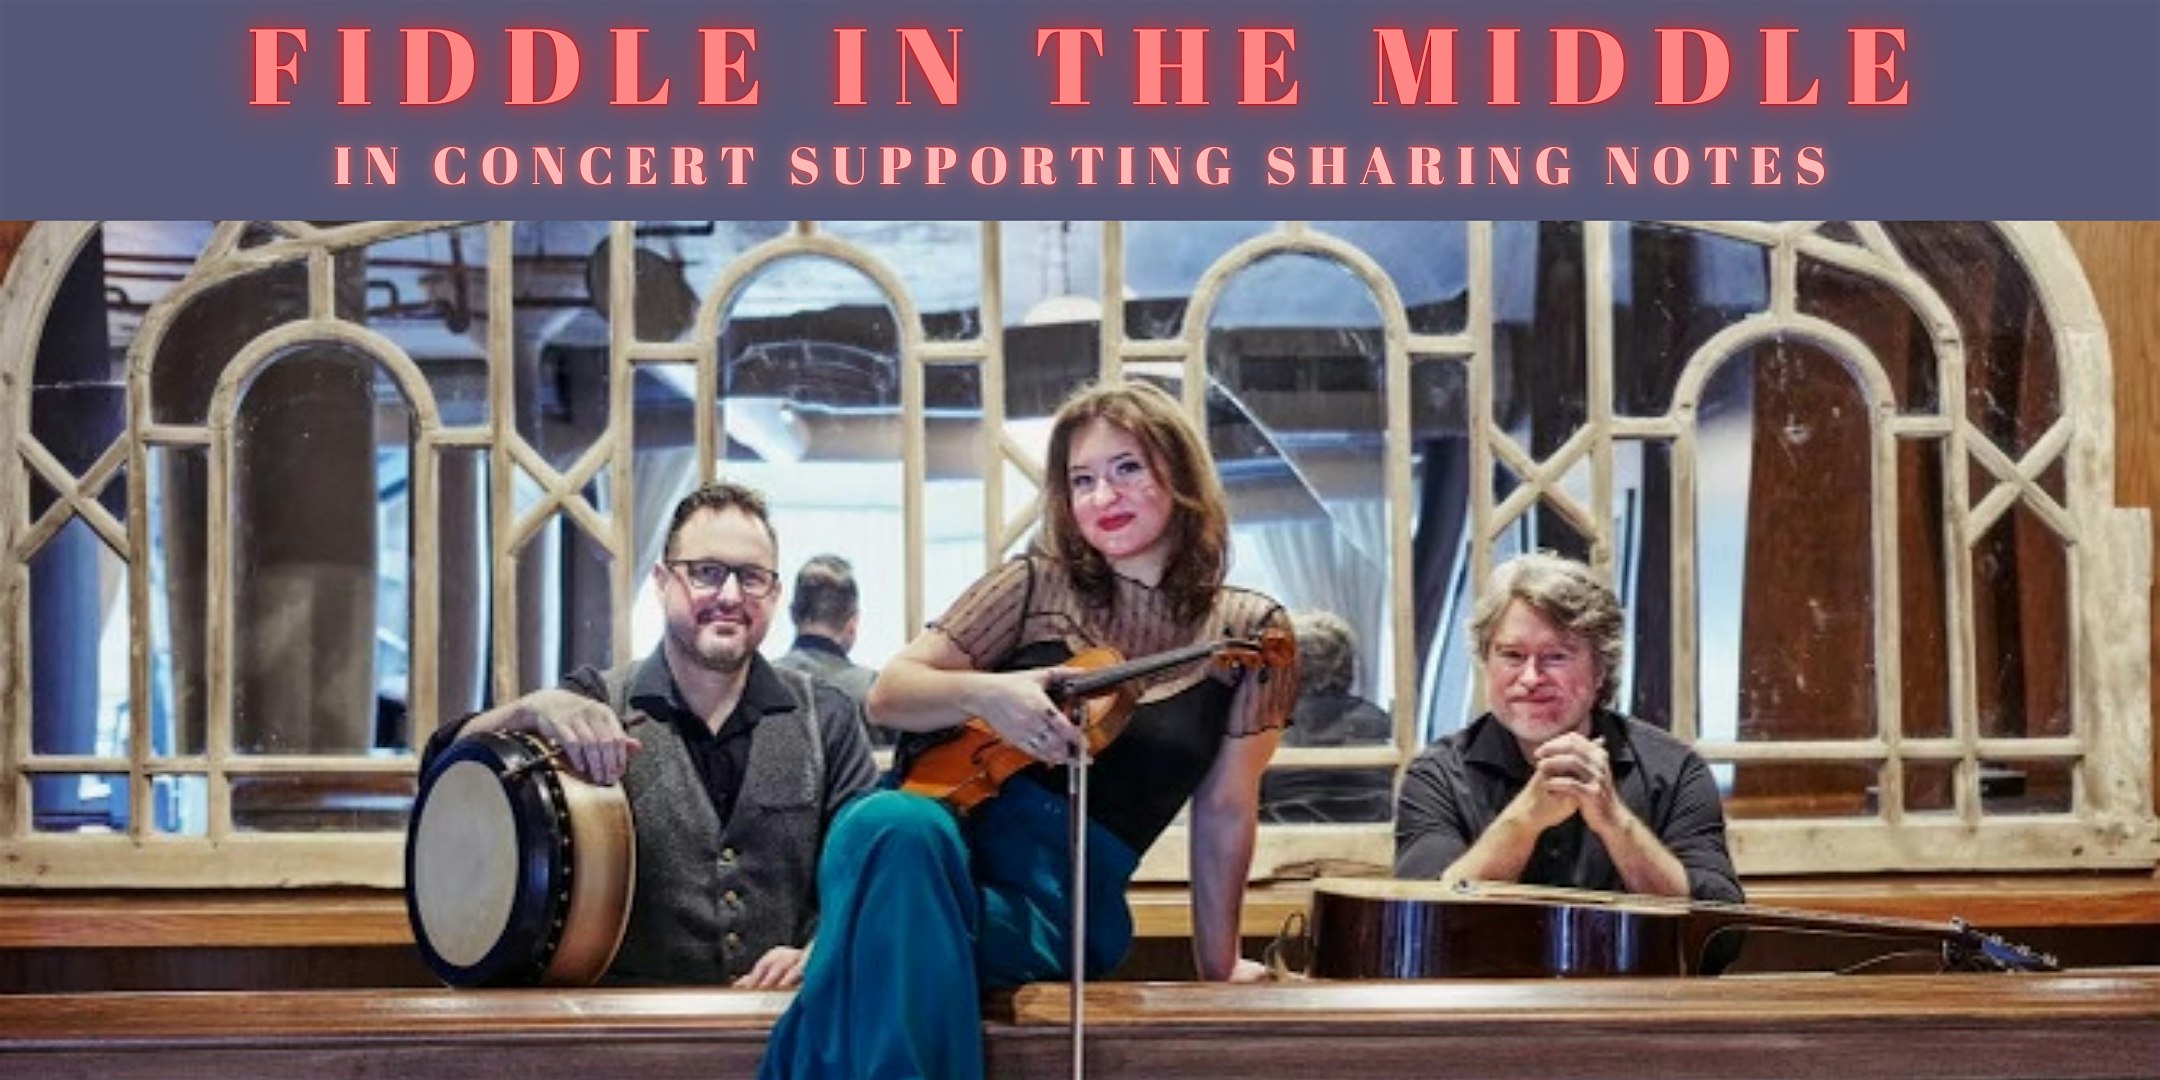 Fiddle in the Middle in Concert (an evening Supporting Sharing Notes)